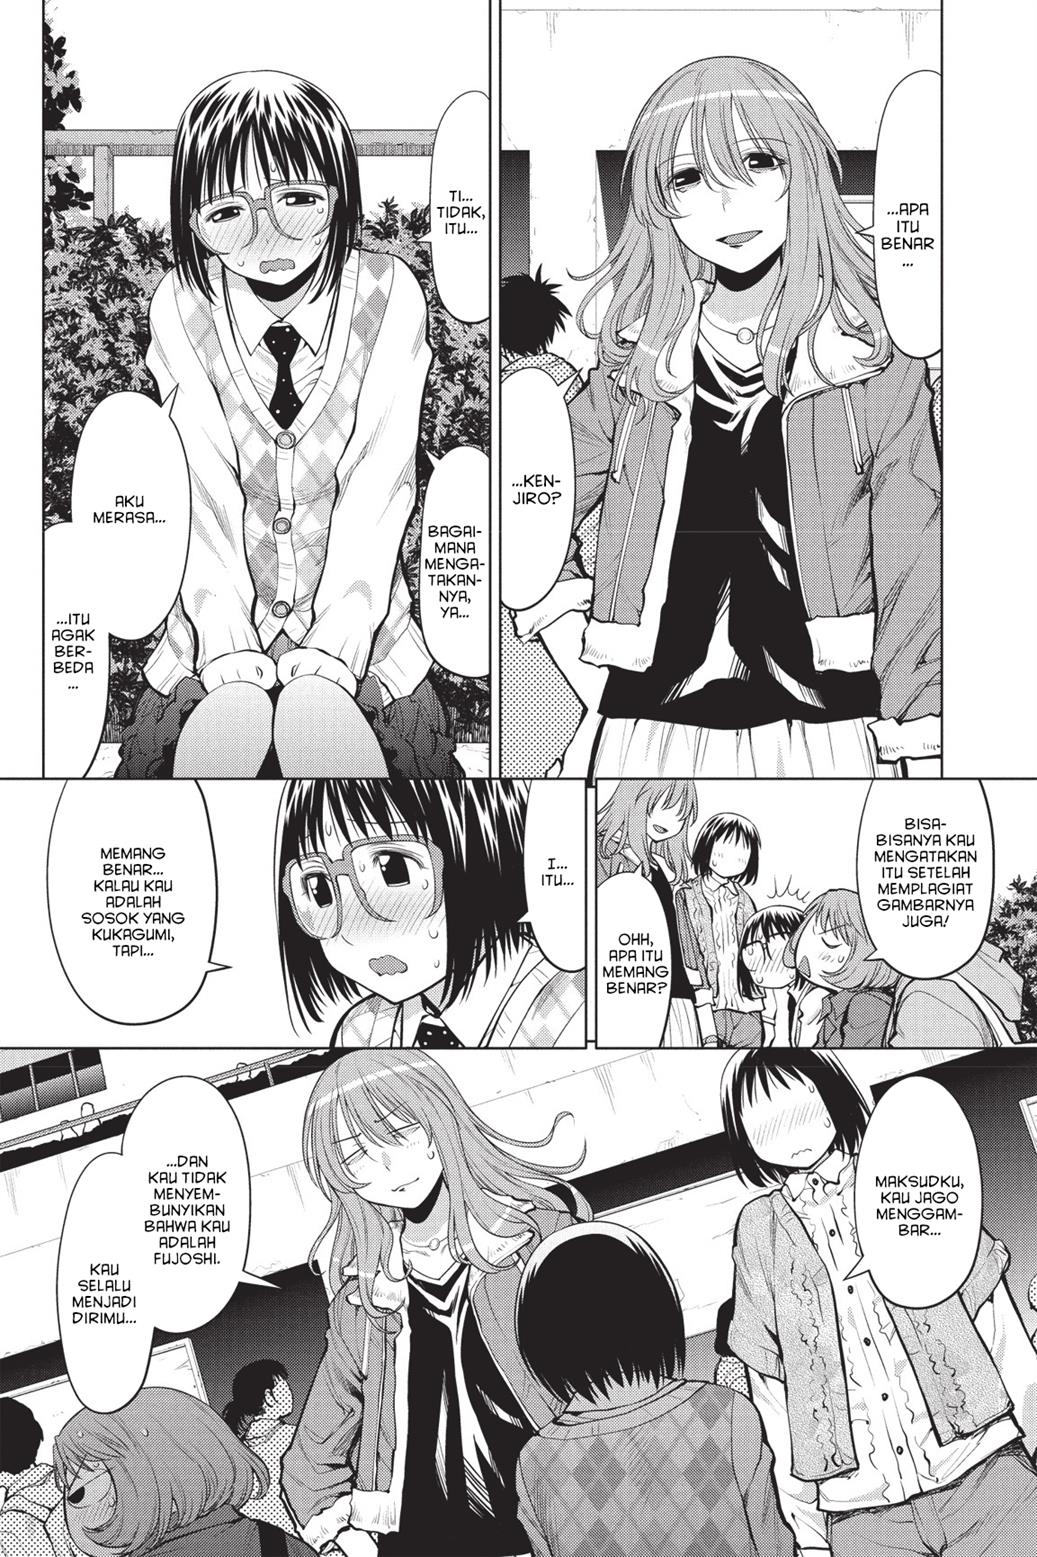 Genshiken – The Society for the Study of Modern Visual Culture Chapter 77 Image 6